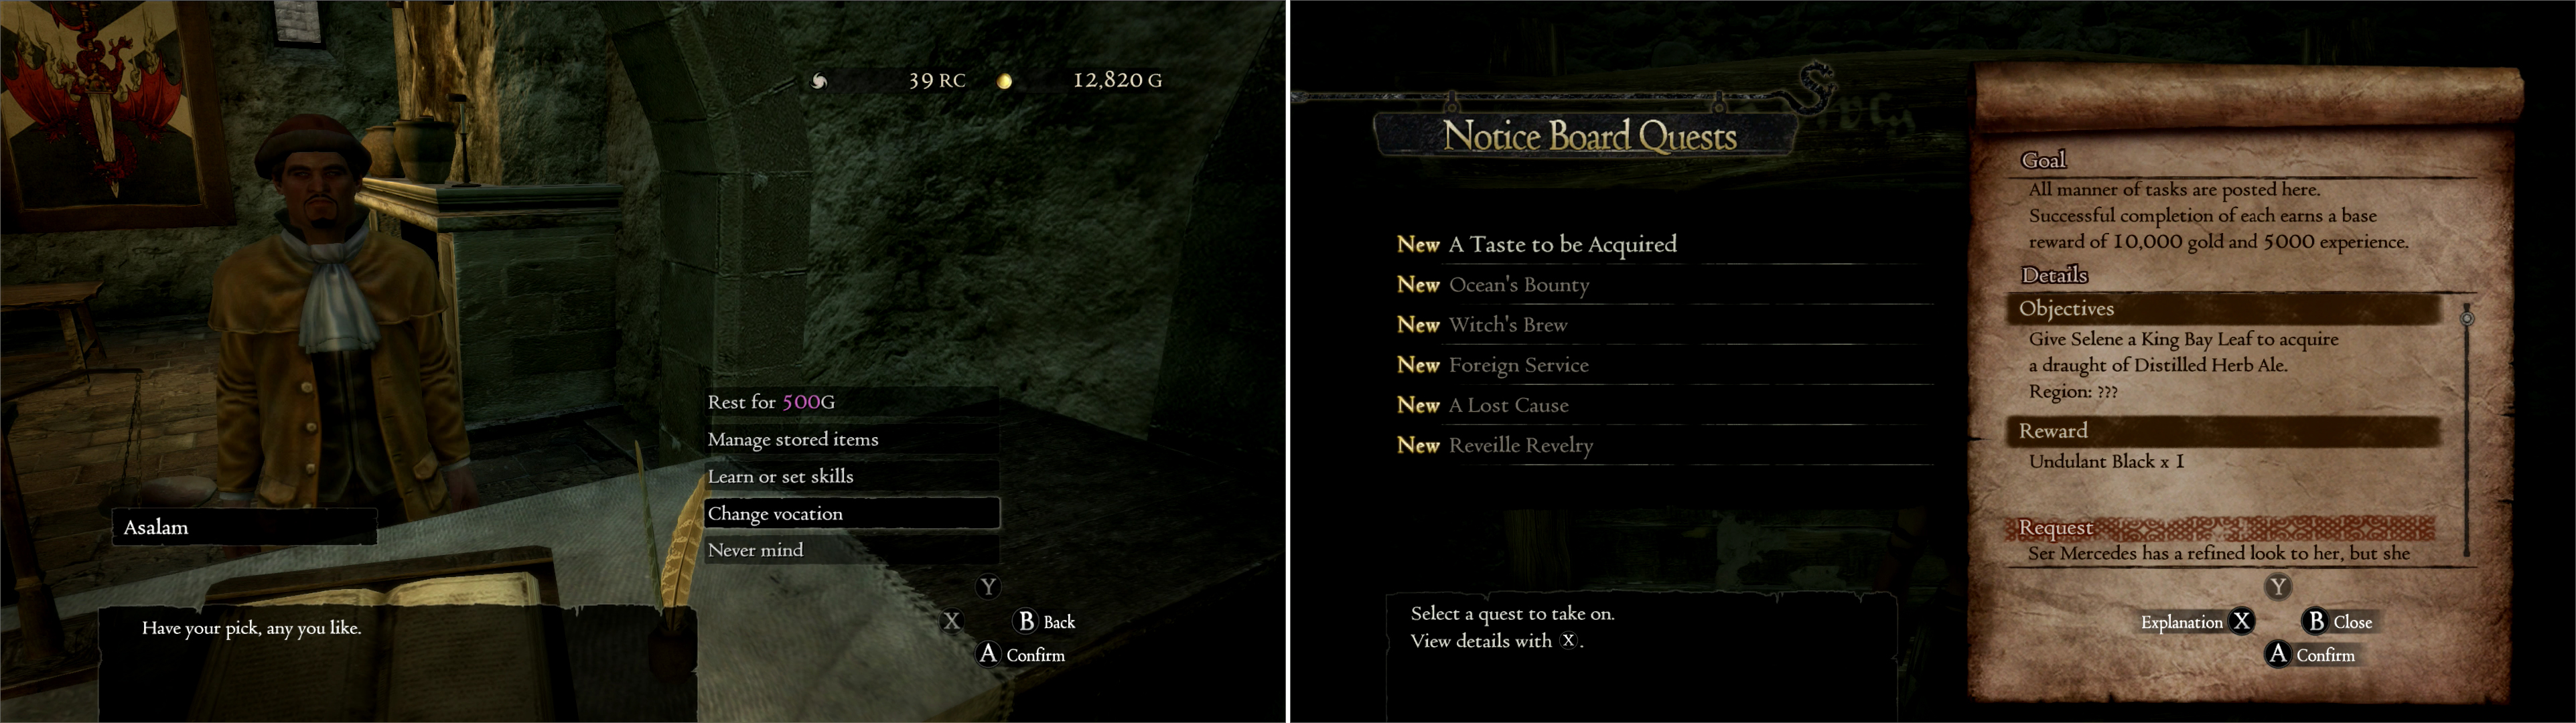 Visit Asalam in the Gran Soren Union Inn to change your Vocation (left). Also be sure to pick up new quests at the nearby Notice Boards (right).